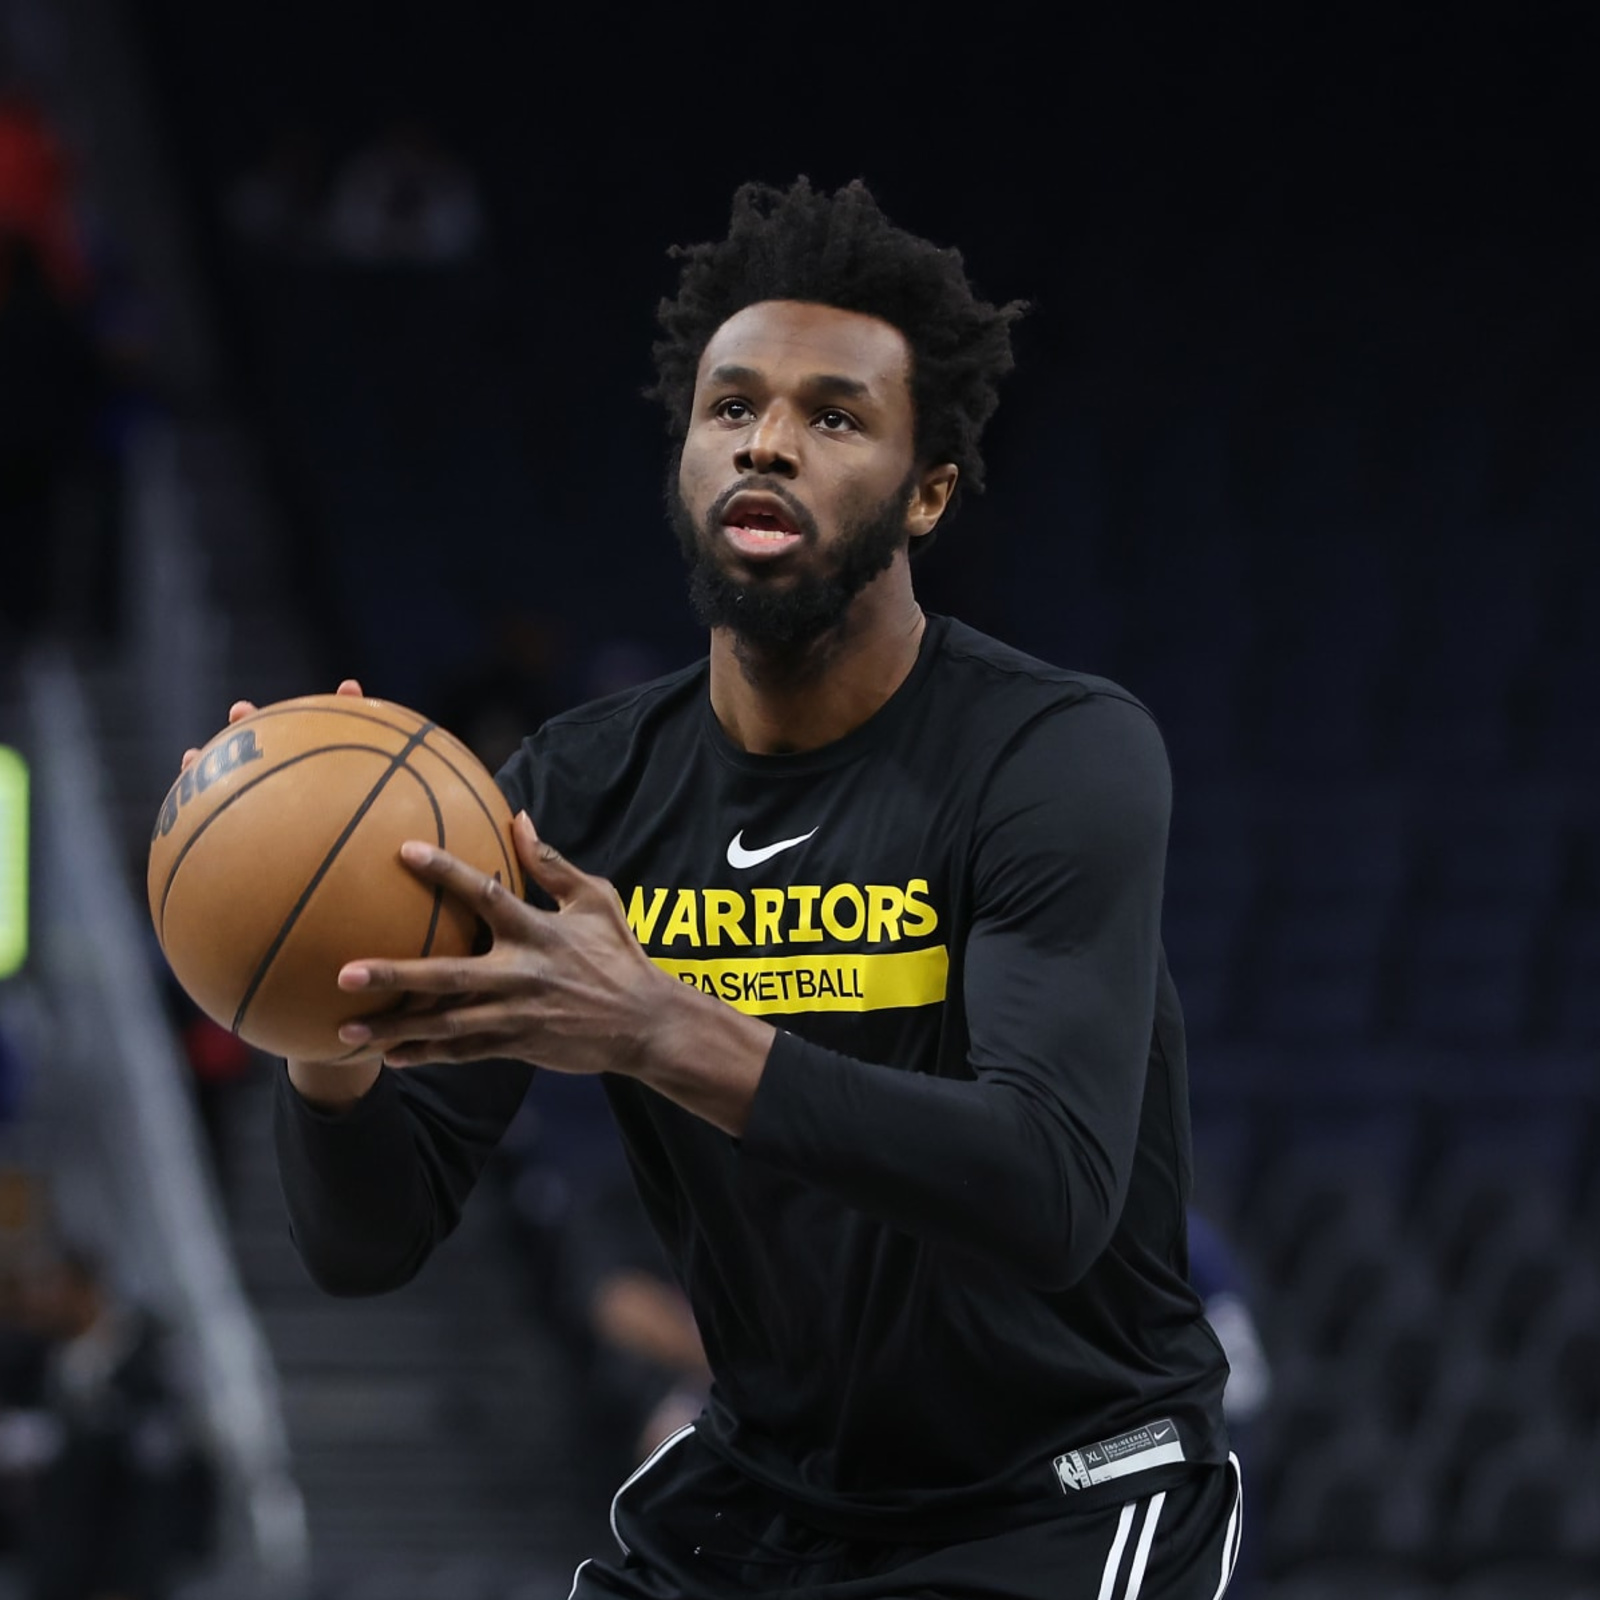 Warriors Andrew Wiggins to Make Return in NBA Playoffs Game 1 vs